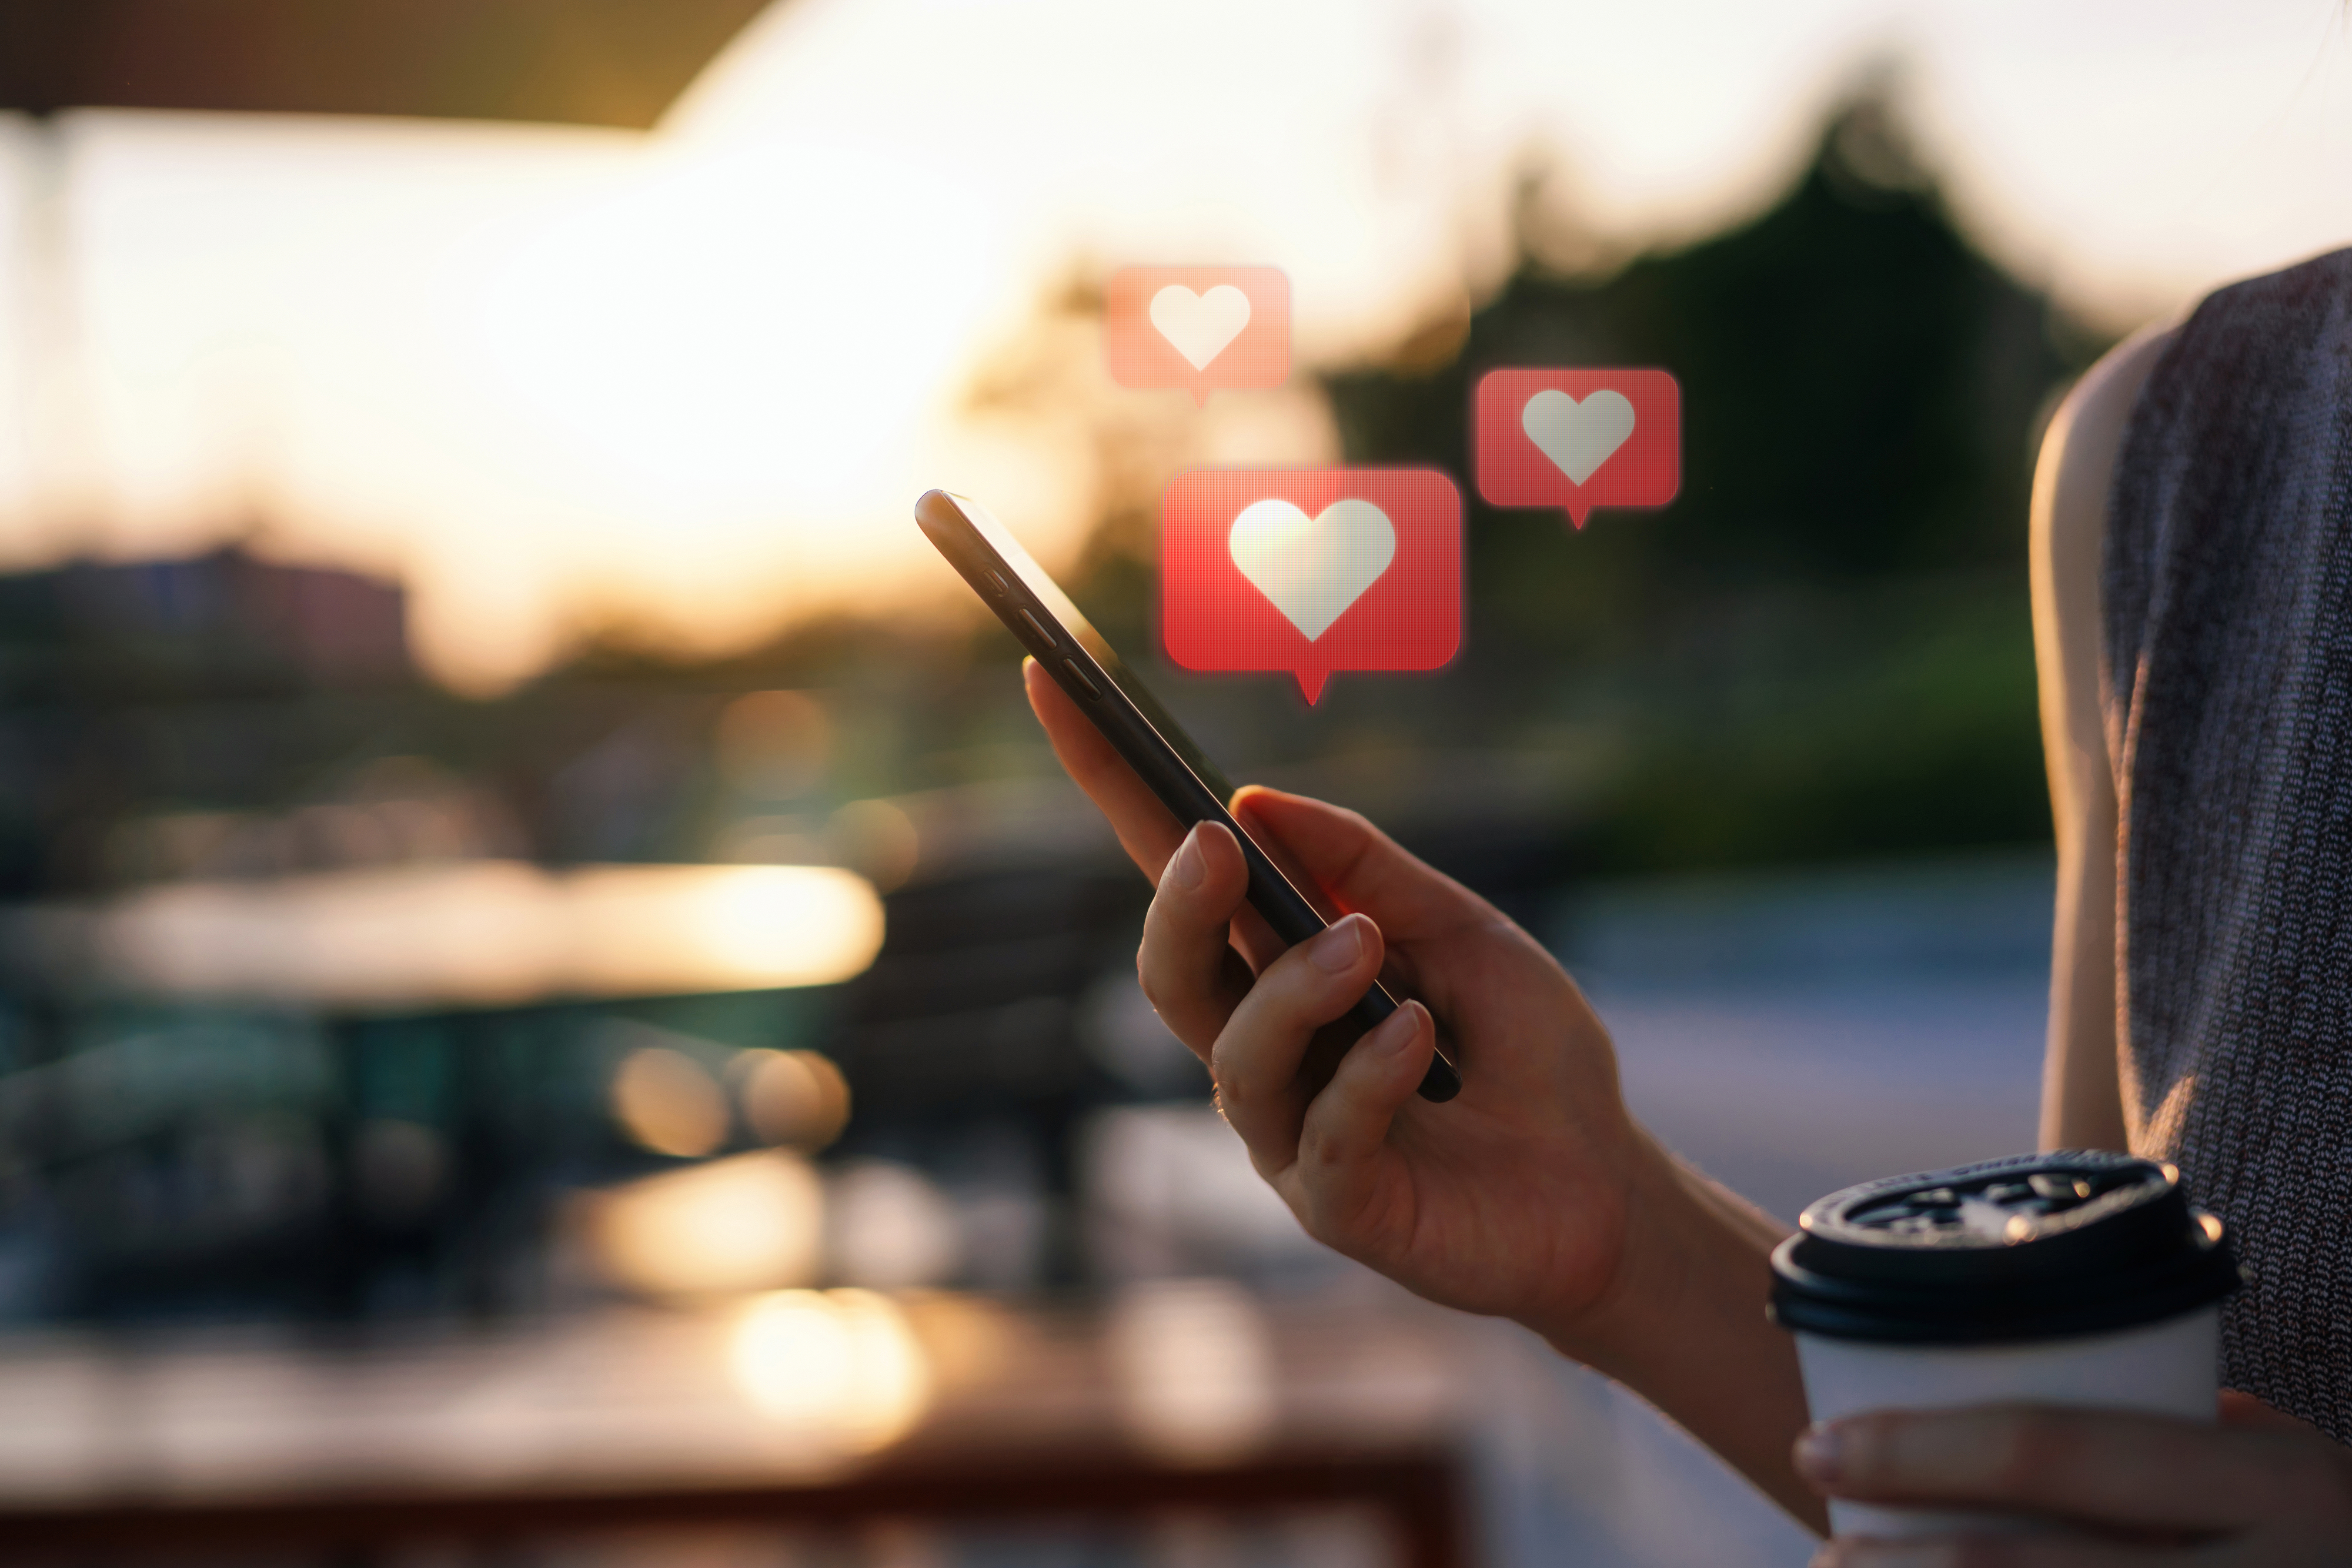 Person holding a phone with heart emojis above, indicating online dating or seeking connection